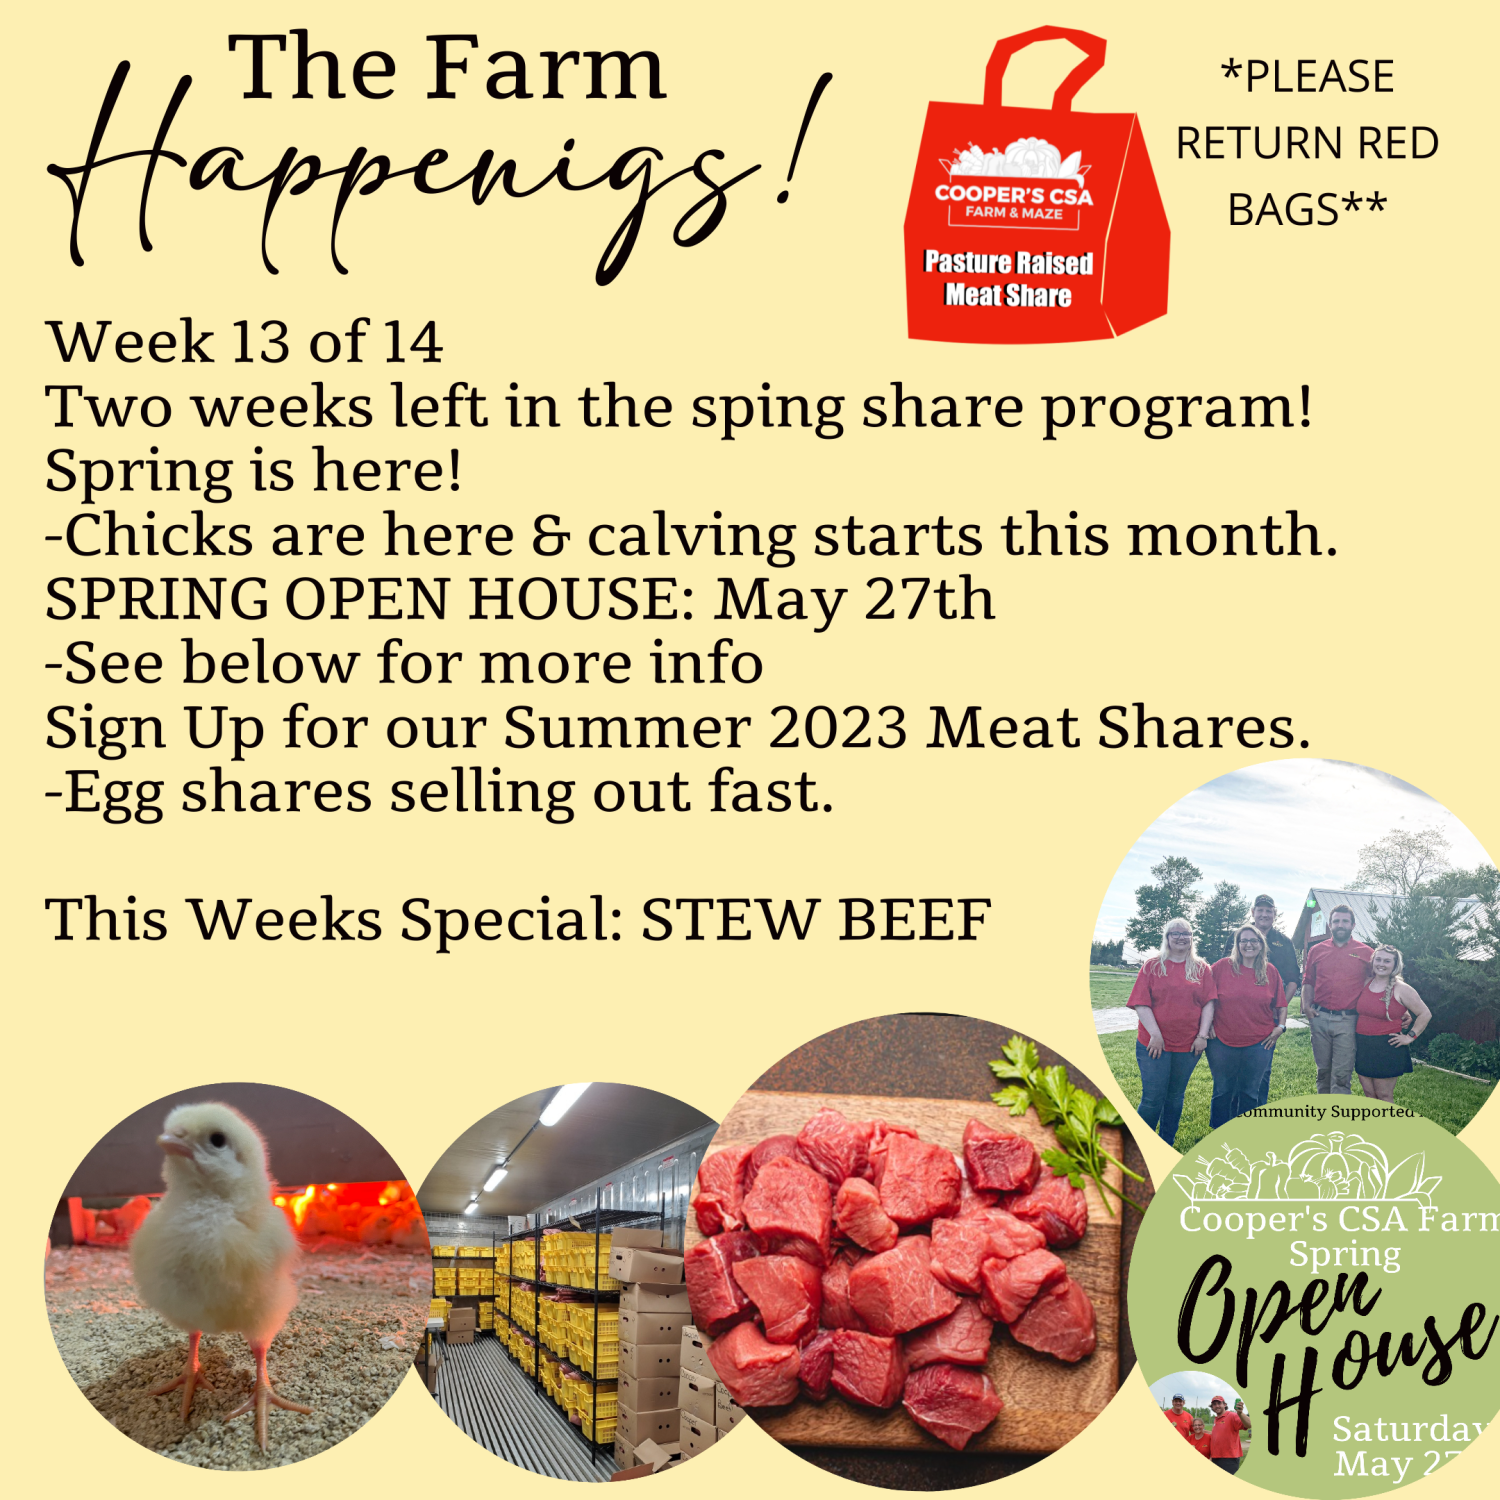 "Pasture Meat Shares"-Coopers CSA Farm Farm Happenings Week 13